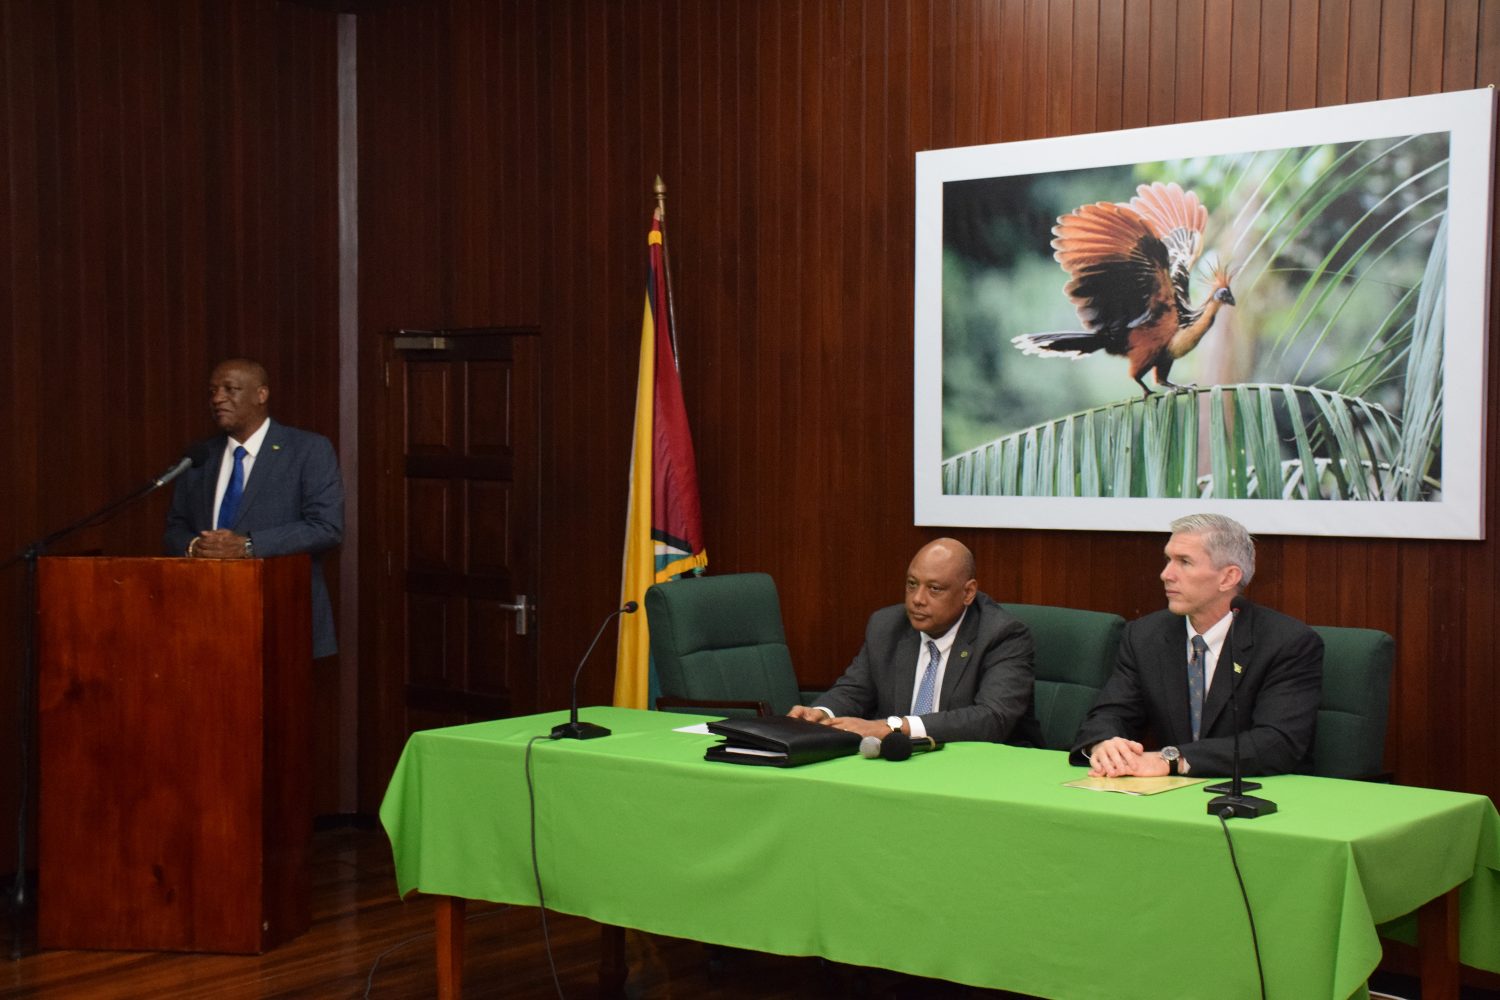 Minister of State Joseph Harmon at the rostrum speaking at yesterday’s unveiling of the ExxonMobil petroleum agreement. Seated at the head table from left are Minister of Natural Resources Raphael Trotman and ExxonMobil’s country head, Rod Henson. (Ministry of the Presidency photo)